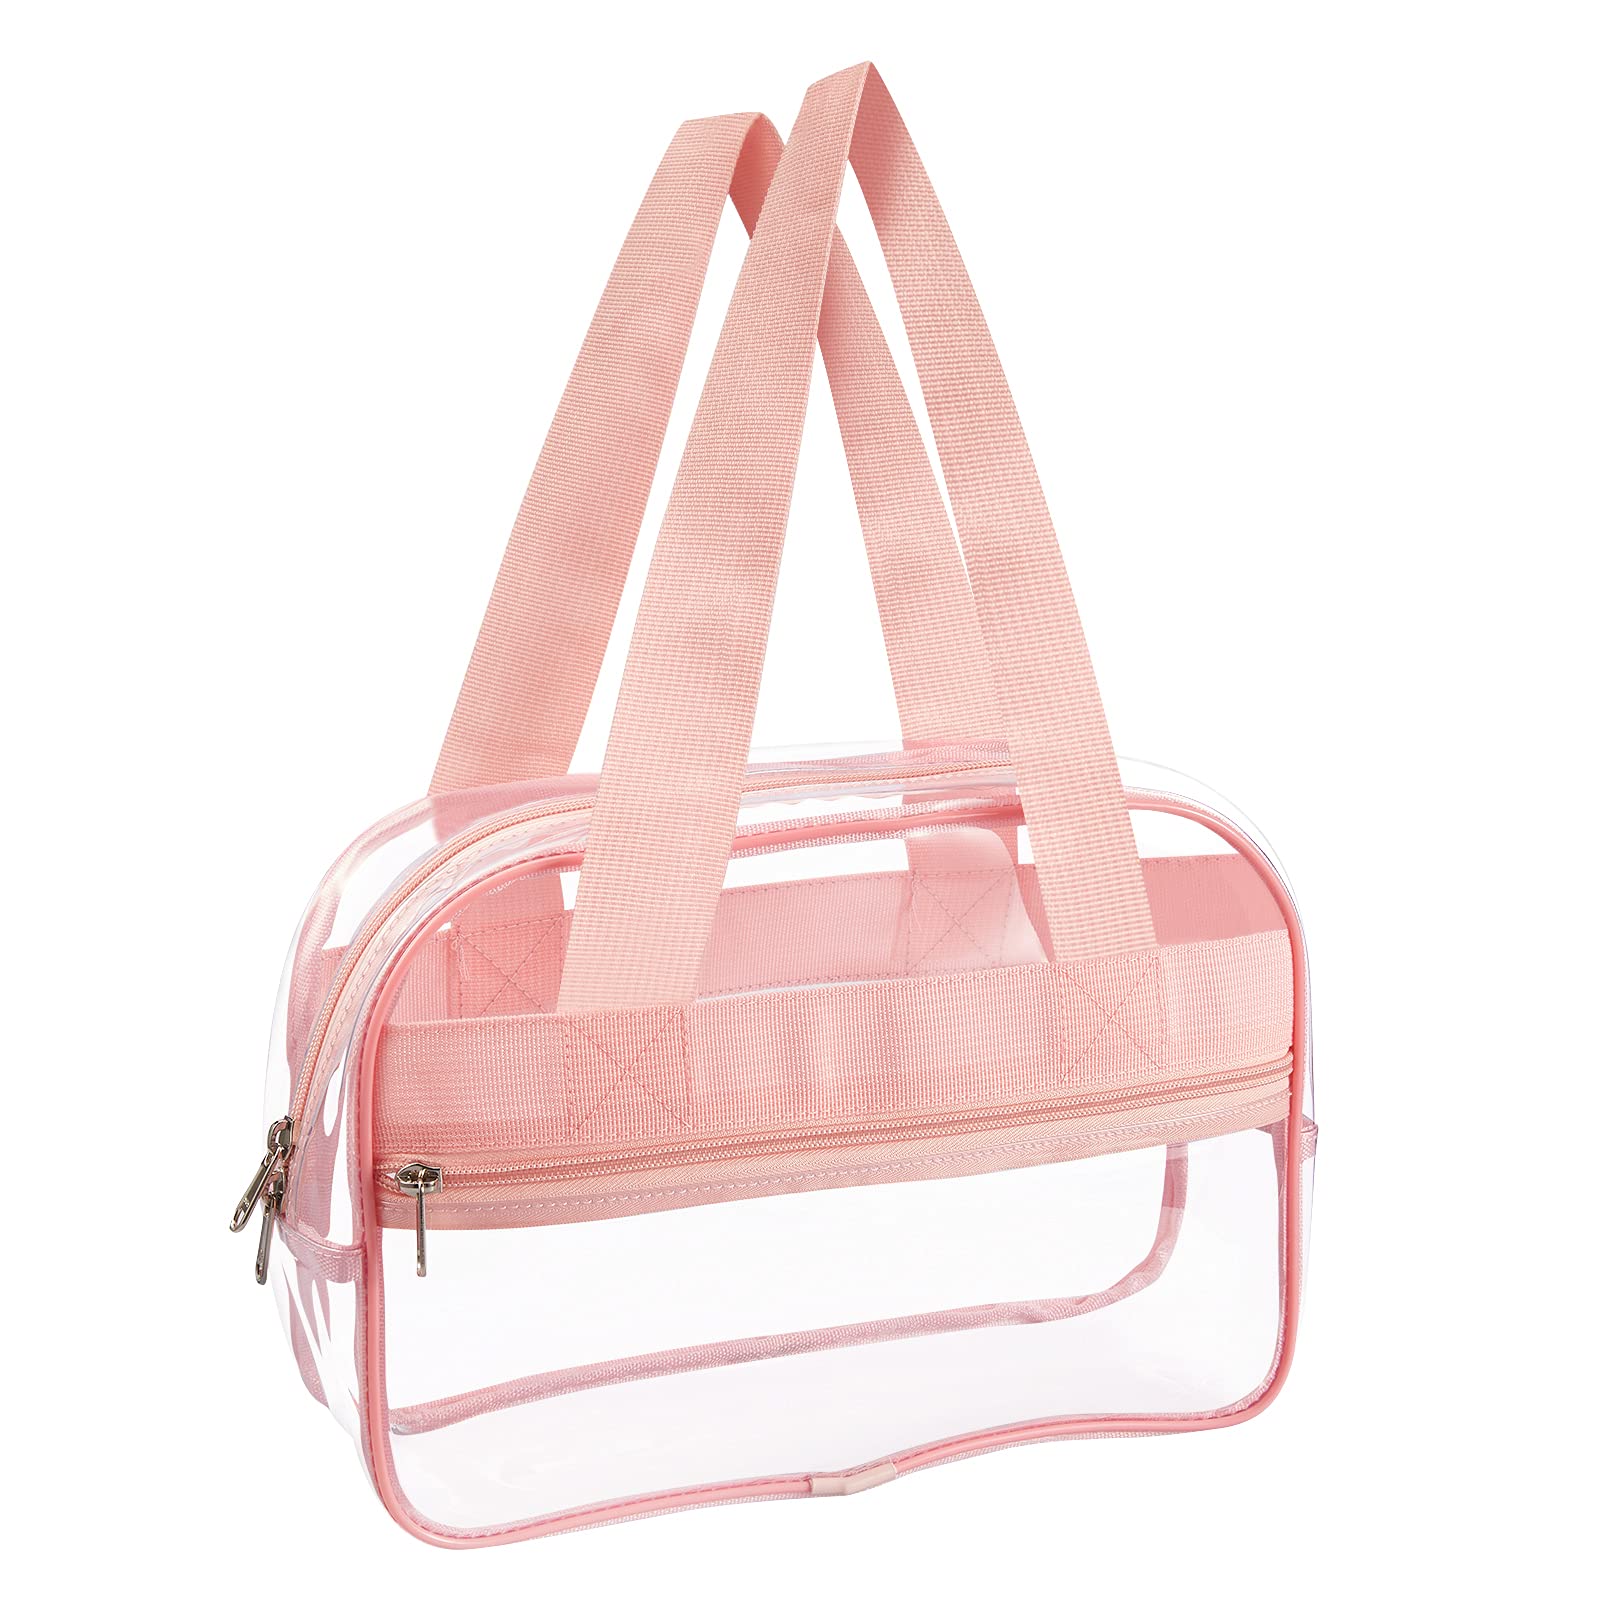 Clear Tote Bag, EEEkit Clear Makeup and Toiletry Organizer, Stadium Approved Handbag, Waterproof PVC Transparent Travel Bag, Size: 10.6 x 4 x 7